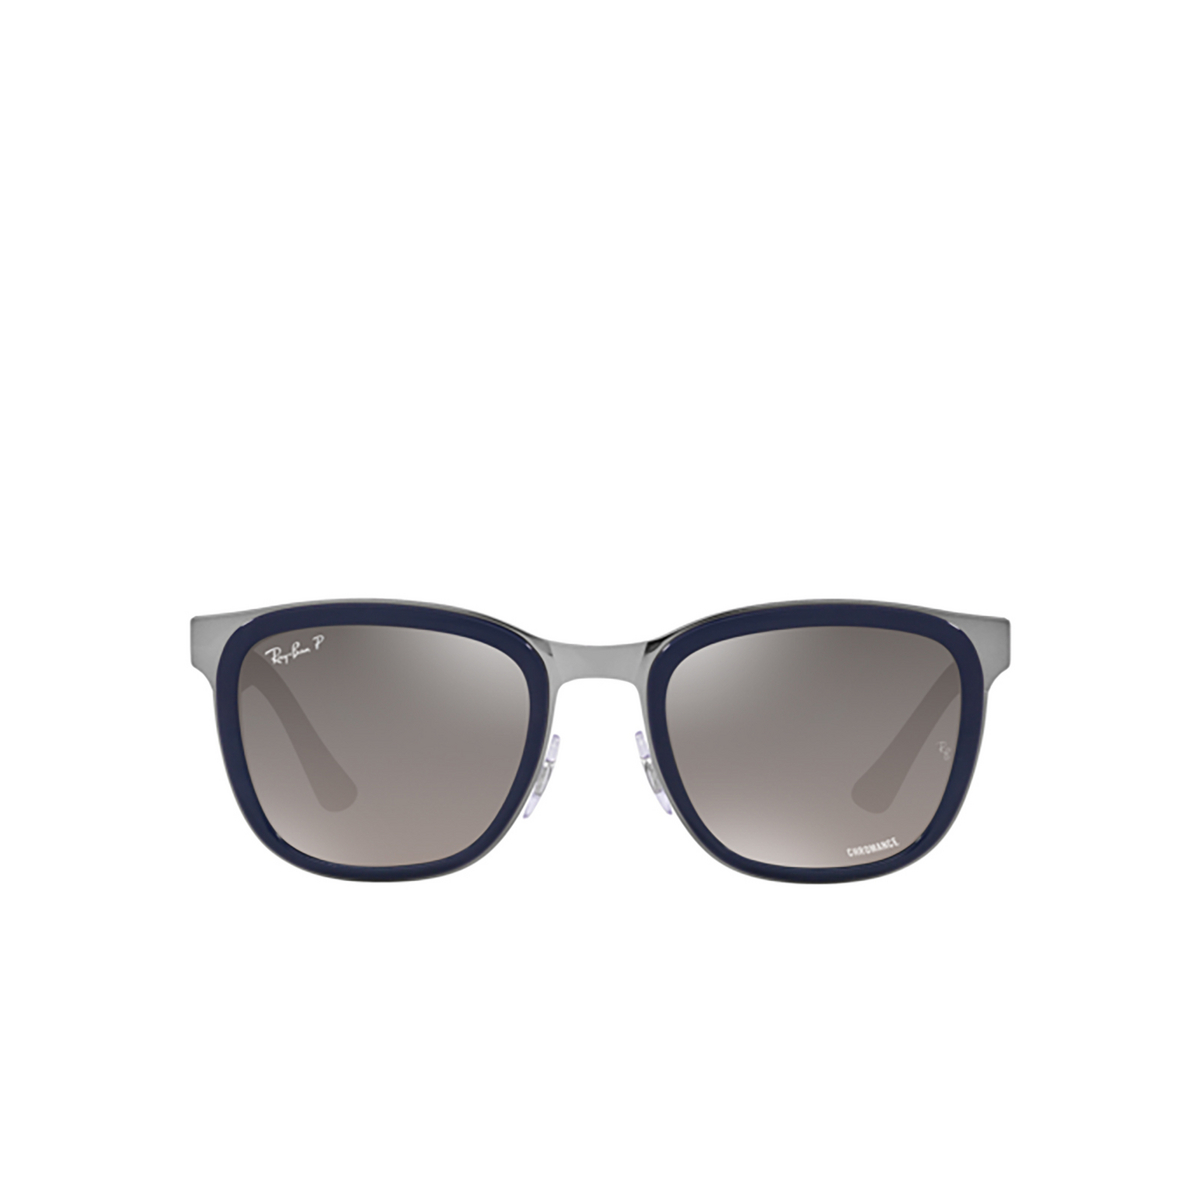 Ray-Ban CLYDE Sunglasses 004/5J Blue On Gunmetal - front view